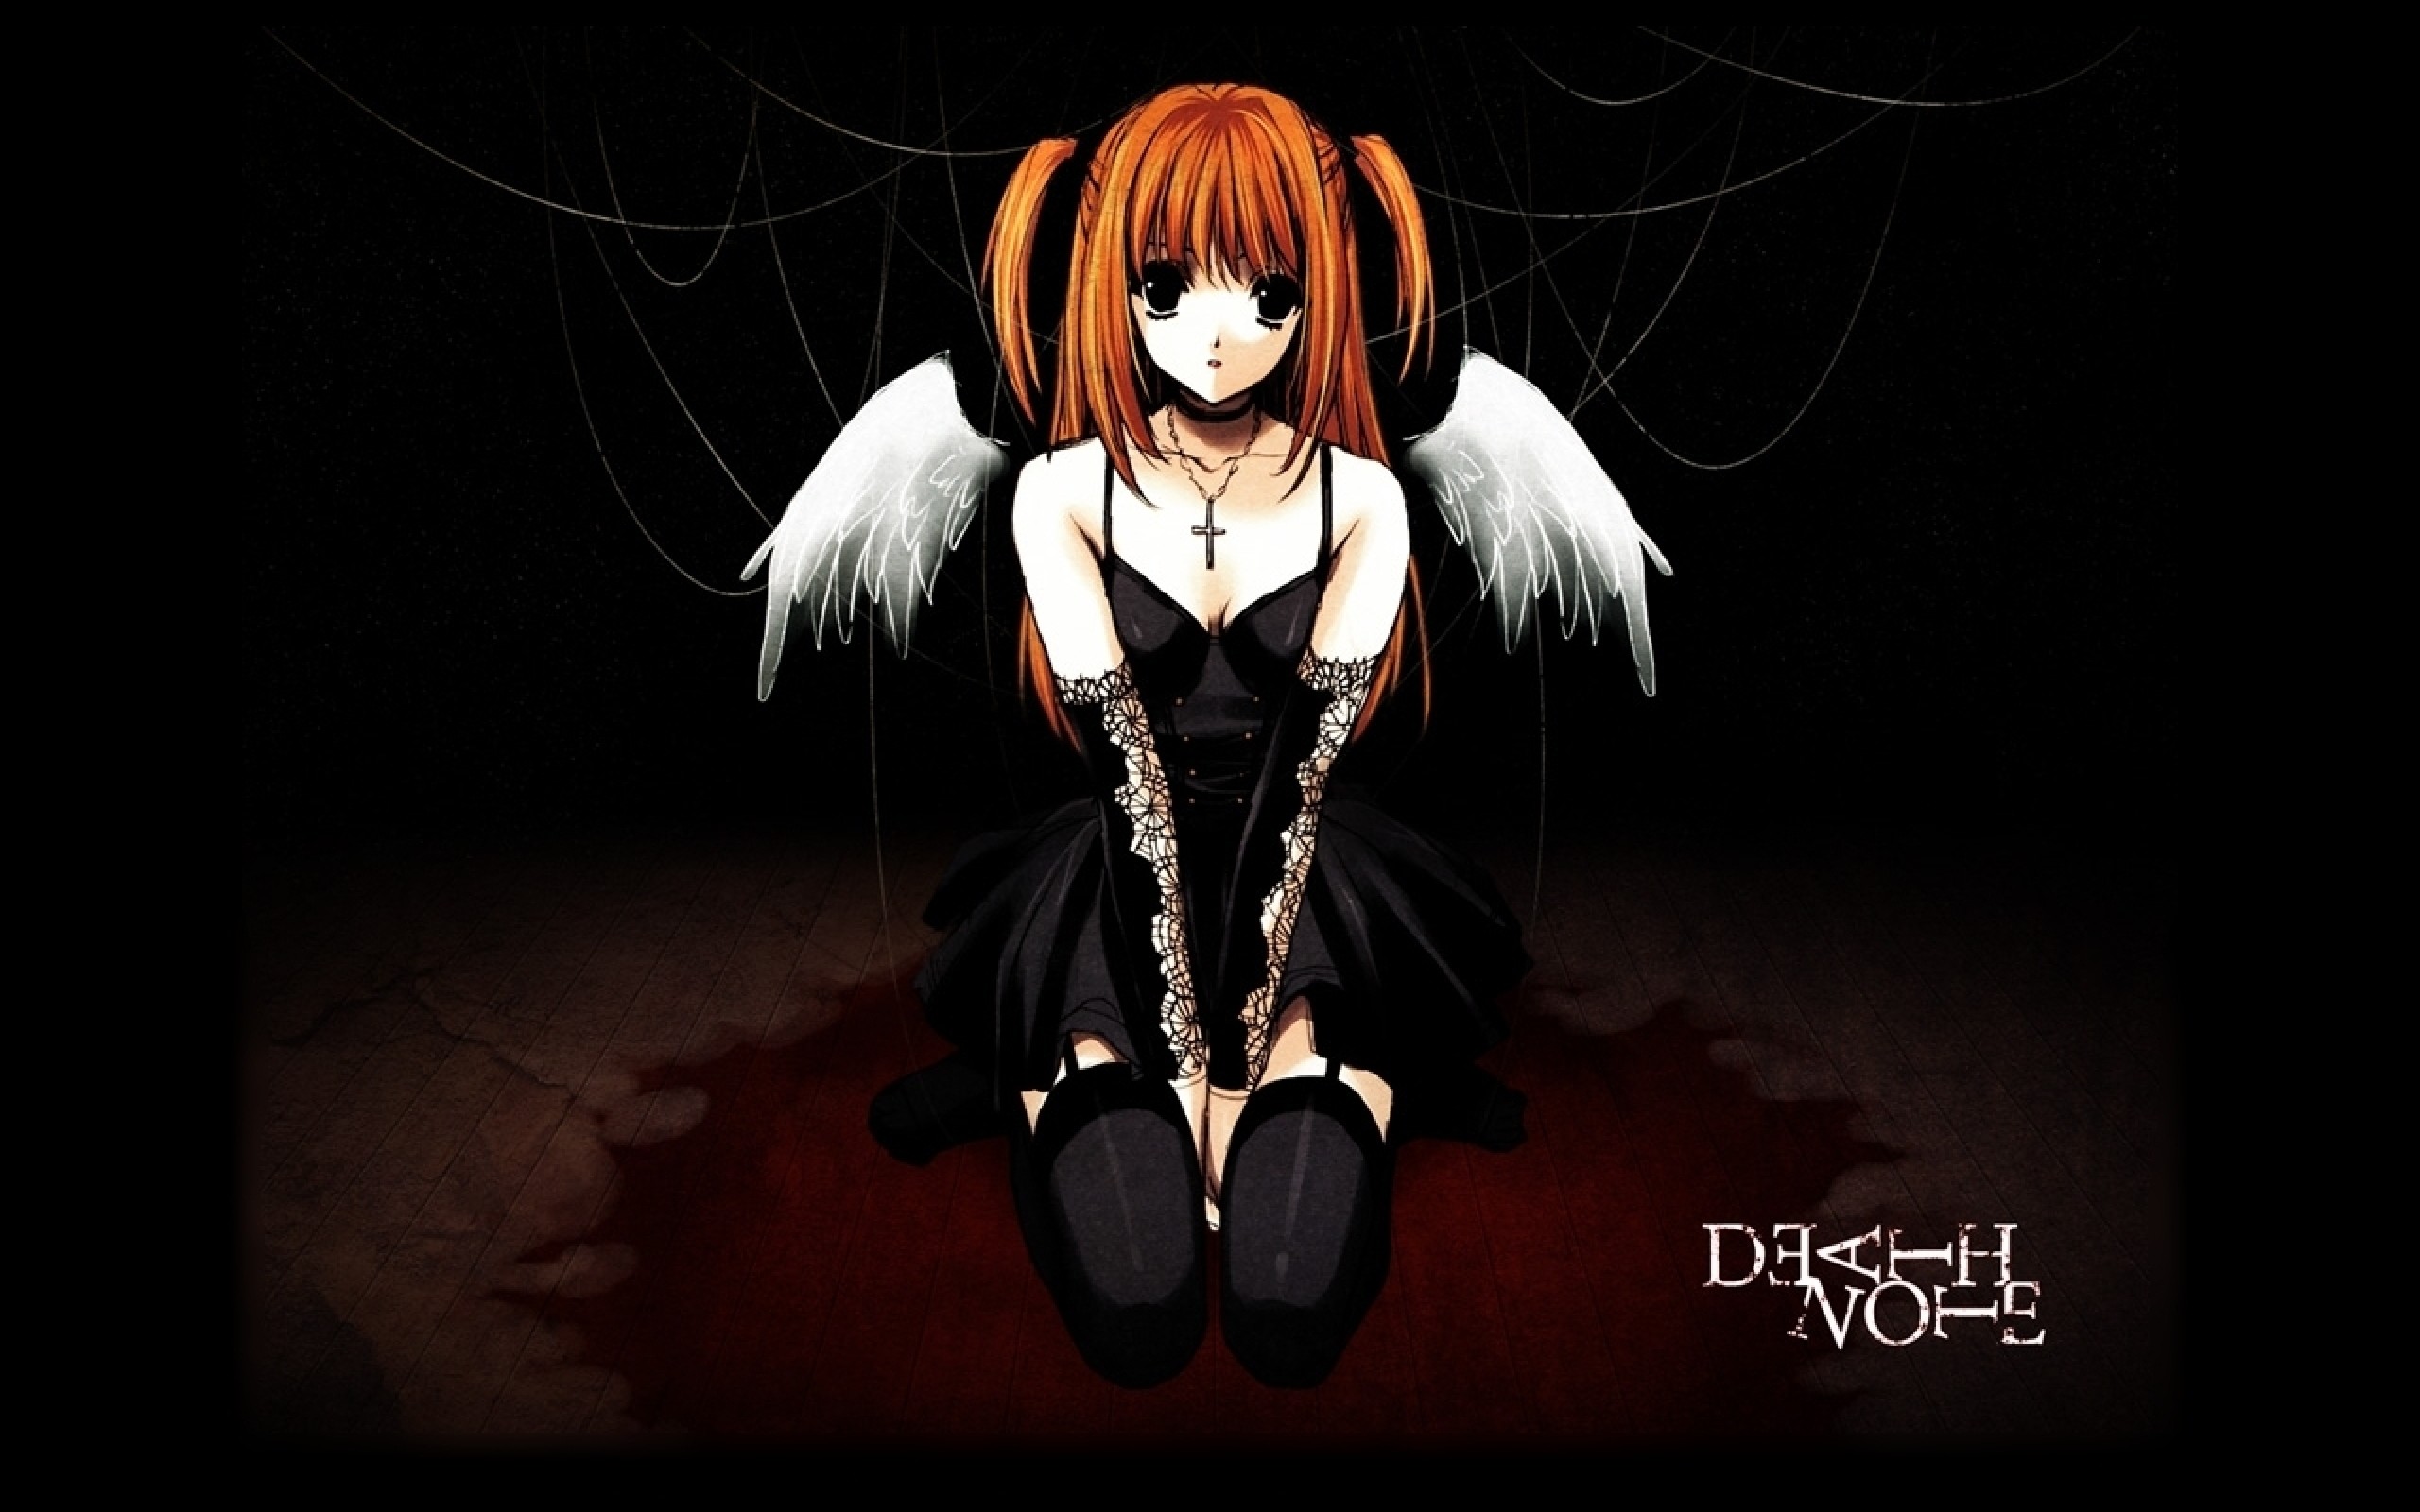 2560x1600 (Unique FHDQ Backgrounds Gabriella Young), Emo Gothic Anime Pictures